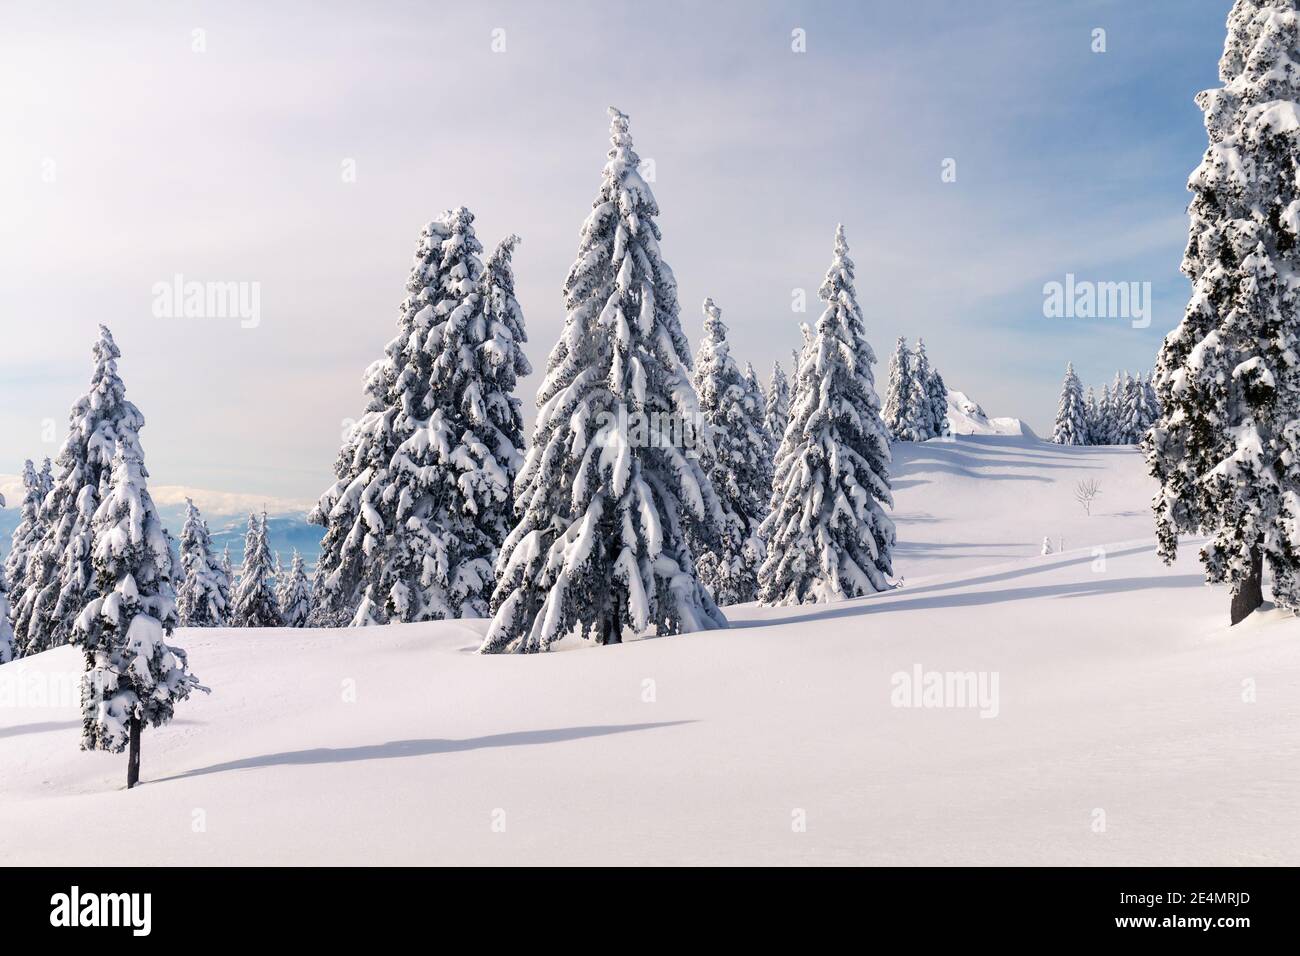 Winter landscape with snow covered pines in mountains. Clear blue skies with sunlight. Stock Photo